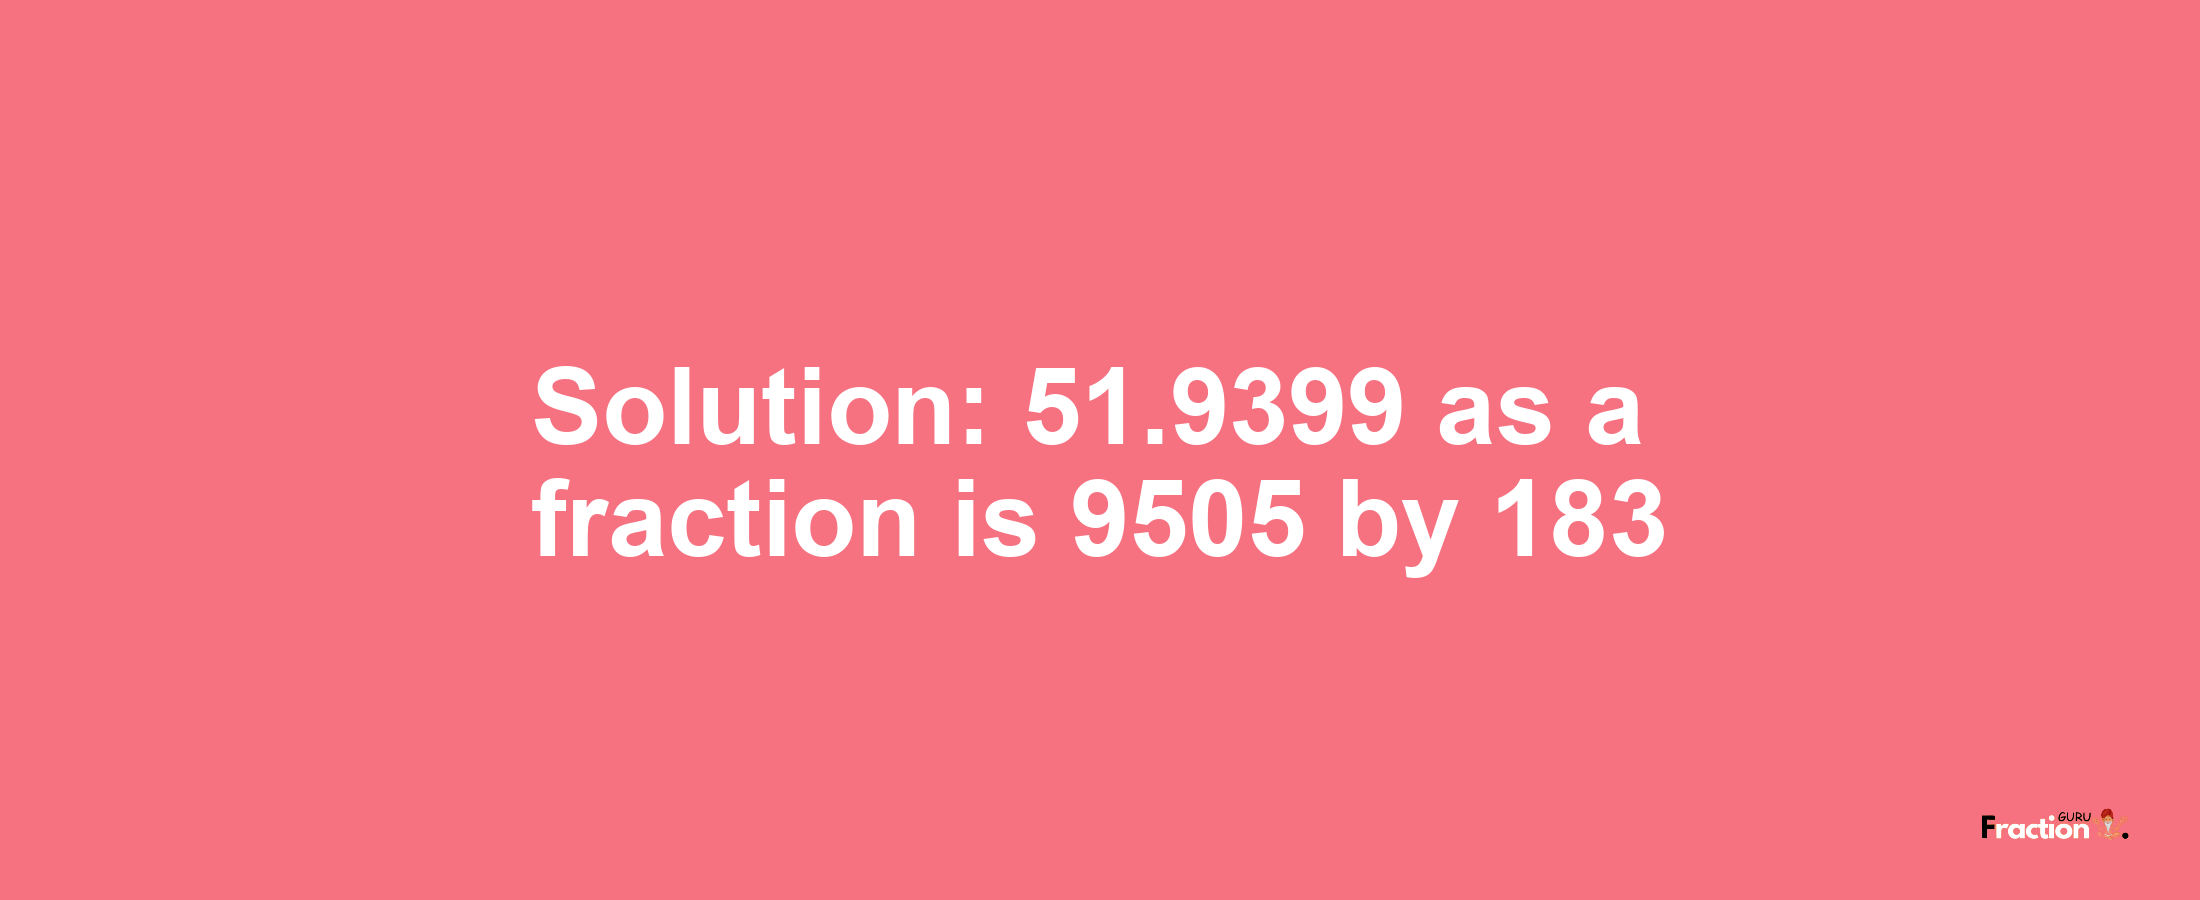 Solution:51.9399 as a fraction is 9505/183